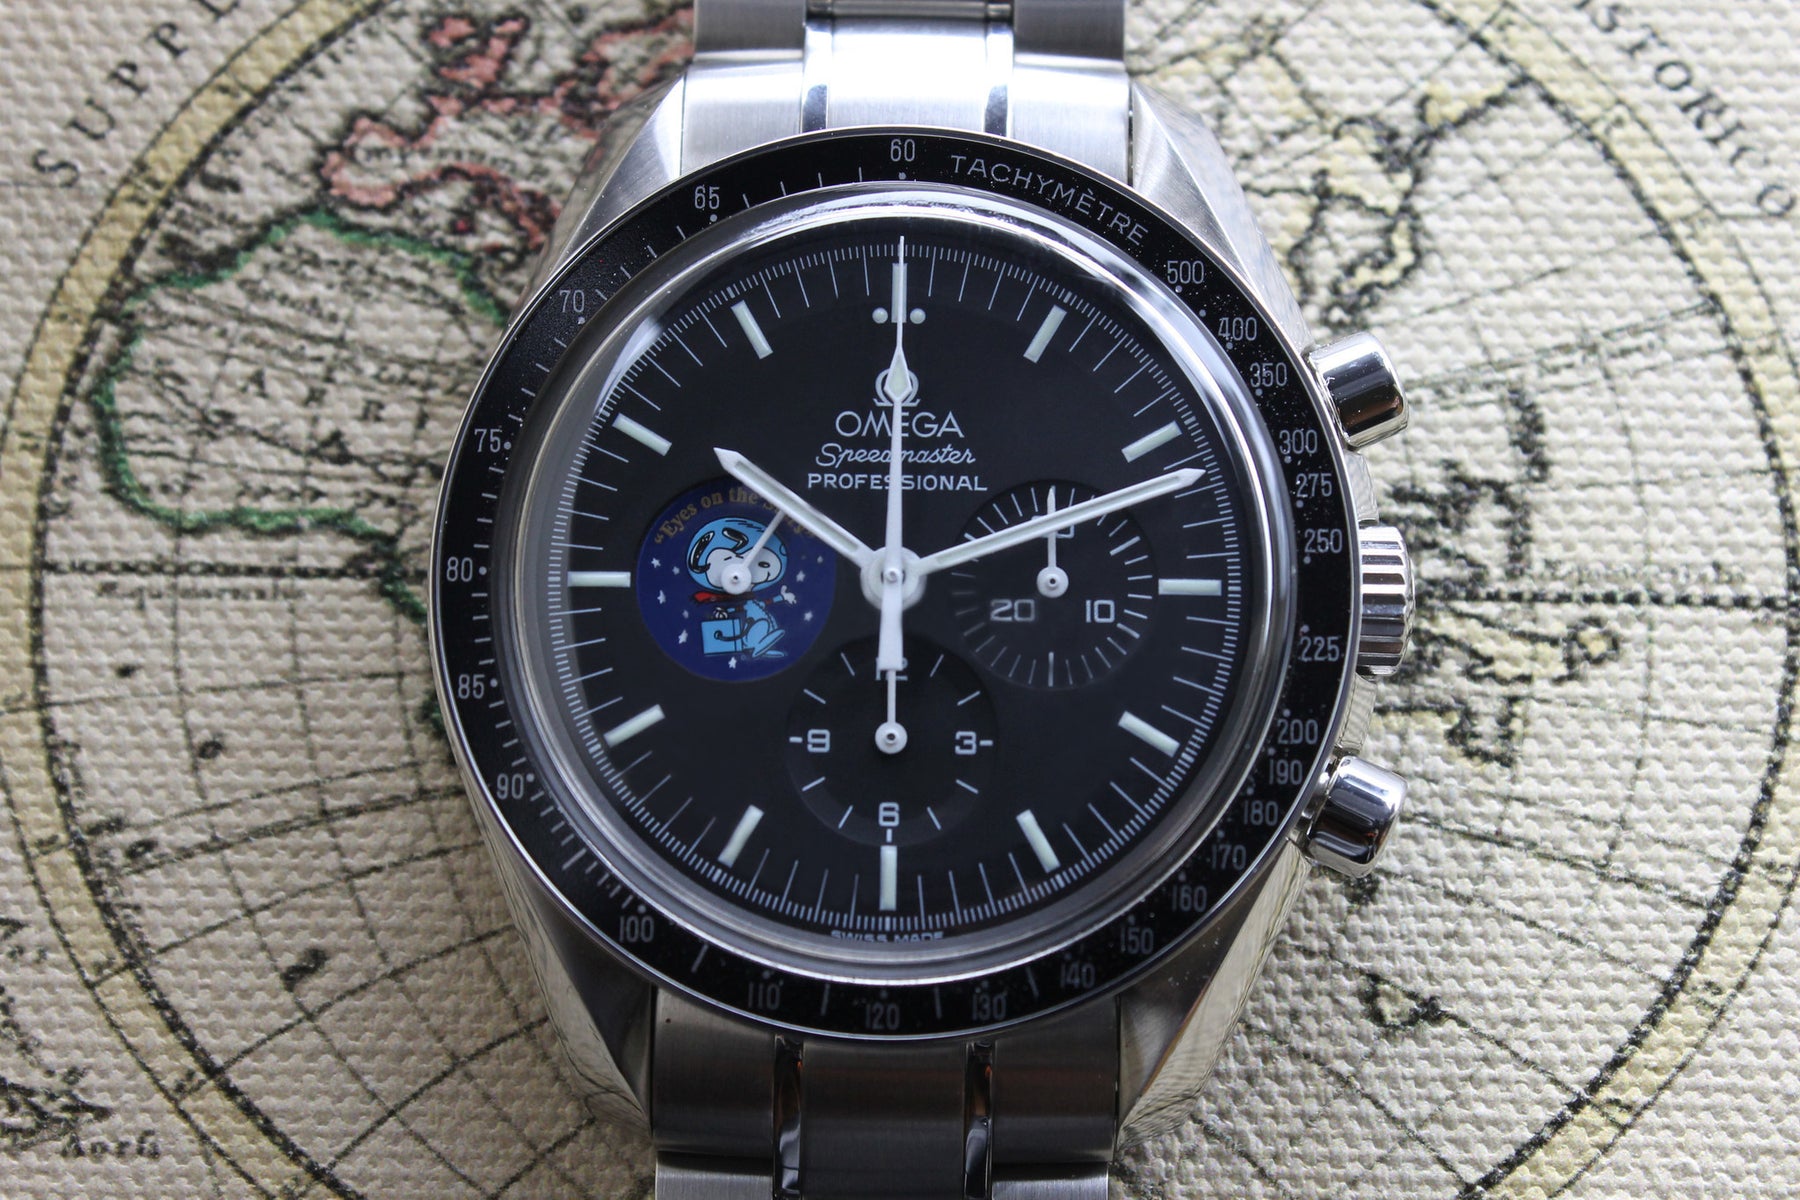 2005 - Omega Speedmaster Professional 'Snoopy' (with box and certificate) - Momentum Dubai